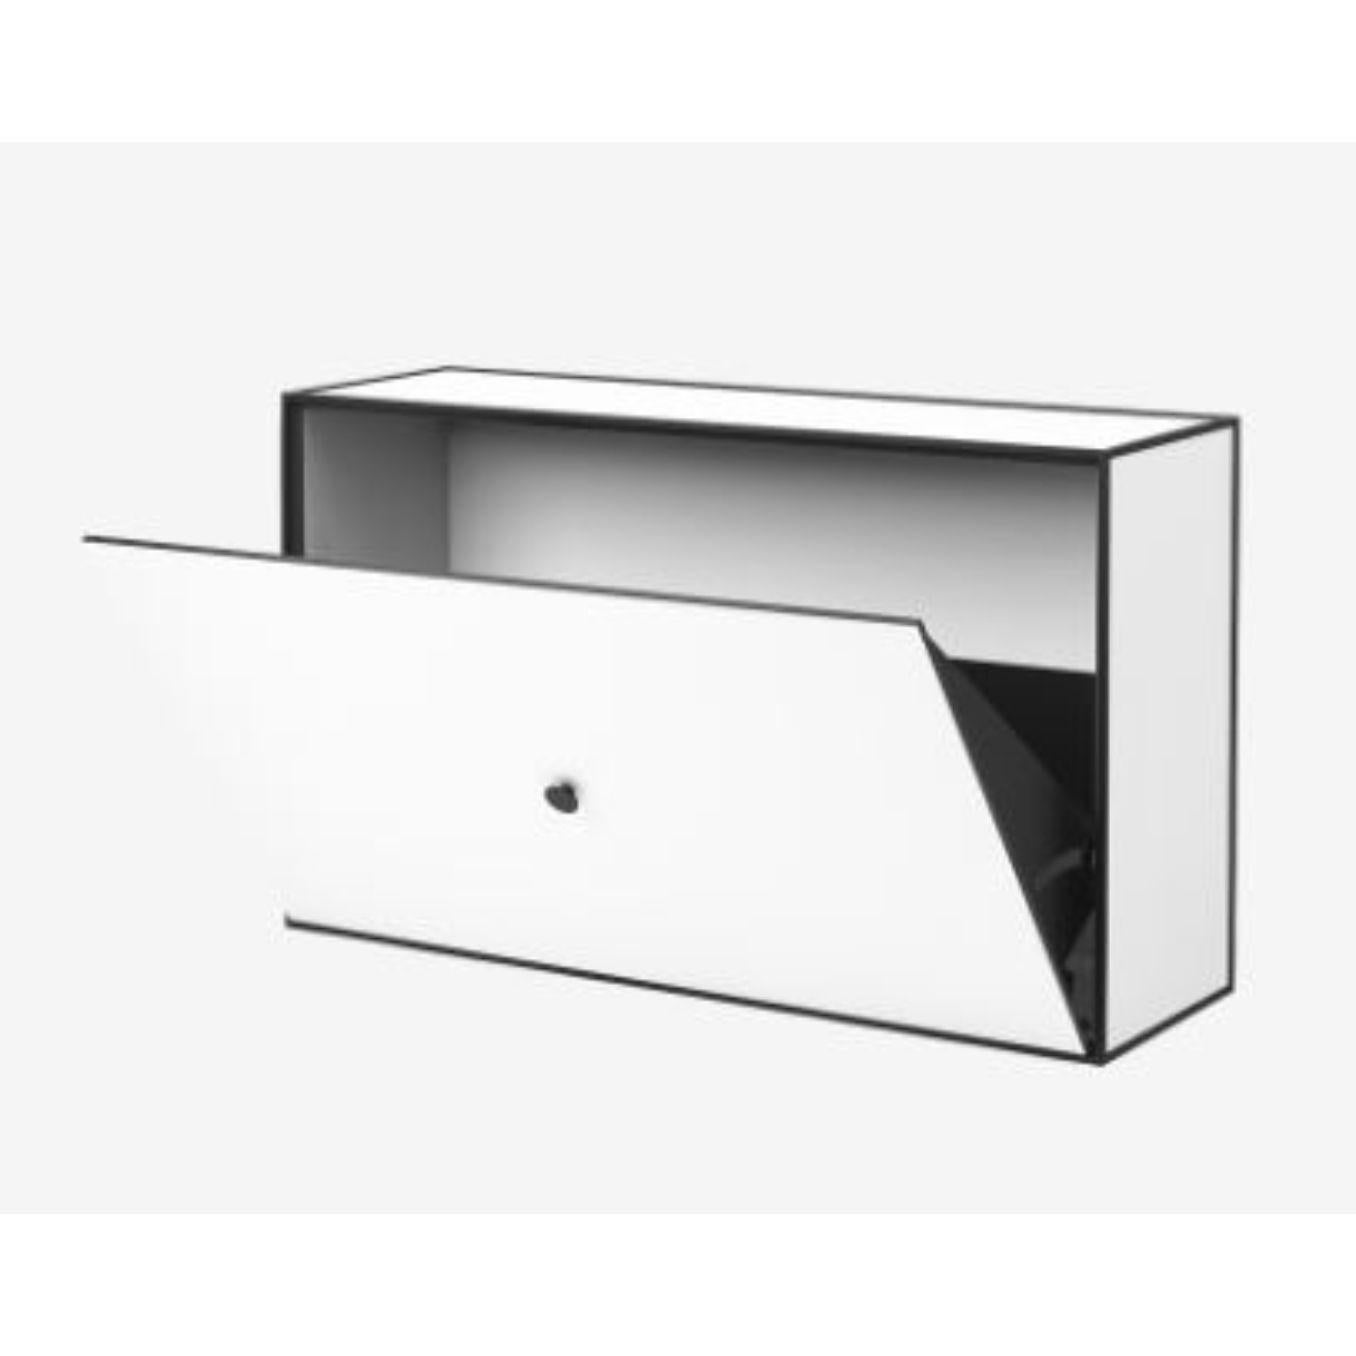 White frame shoe cabinet by Lassen.
Dimensions: D 70 x W 21 x H 42 cm 
Materials: Finér, Melamin, Melamine, Metal, Veneer
Also available in different colors and dimensions. 
Weight: 20 Kg

By Lassen is a Danish design brand focused on iconic